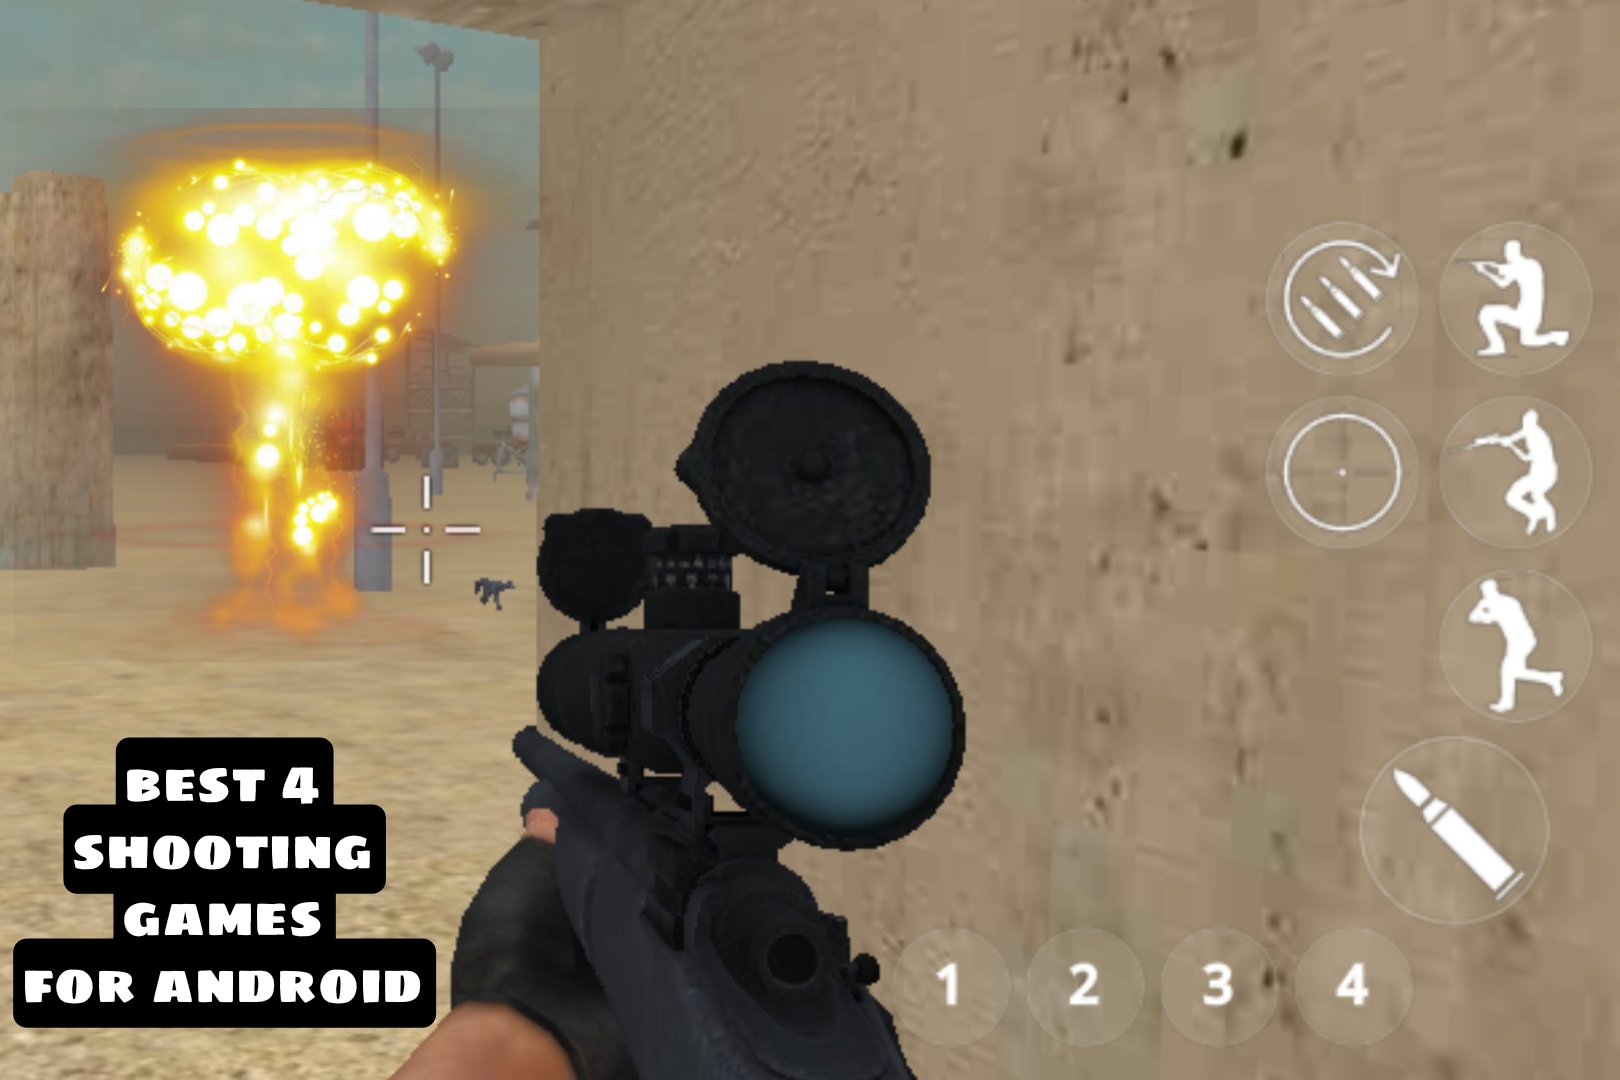 Best 4 Shooting Games for Android » Tamil Tech4u